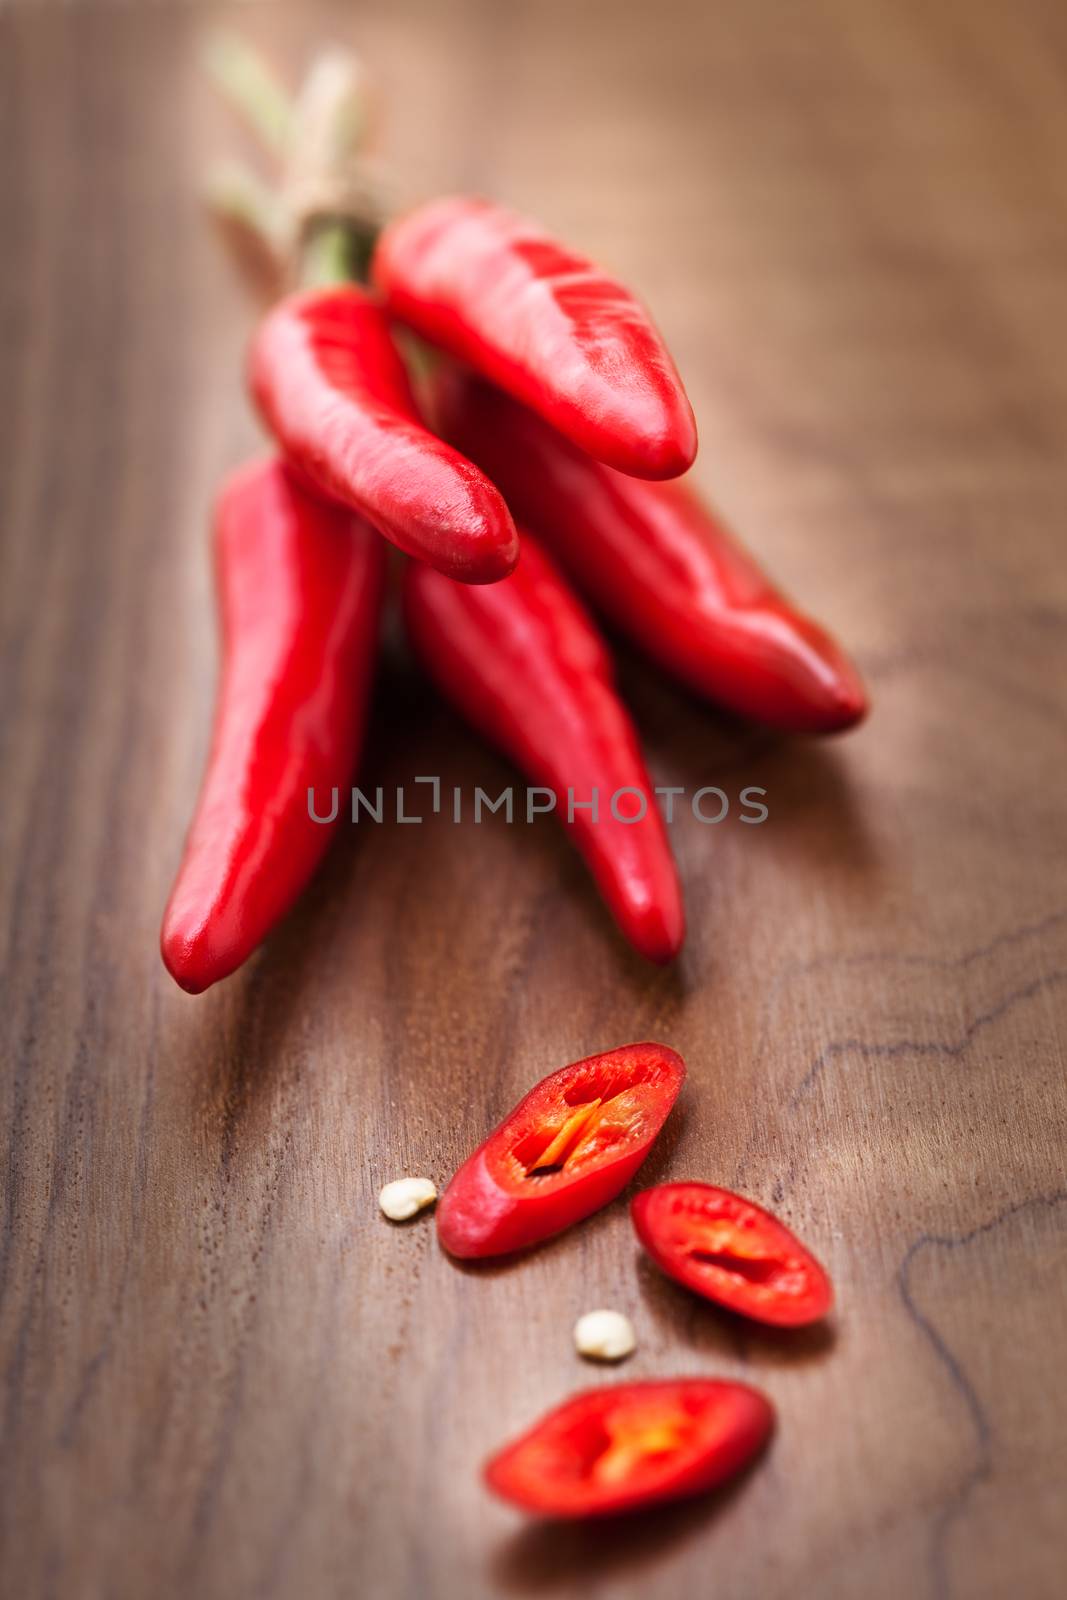 Red chilli peppers by supercat67